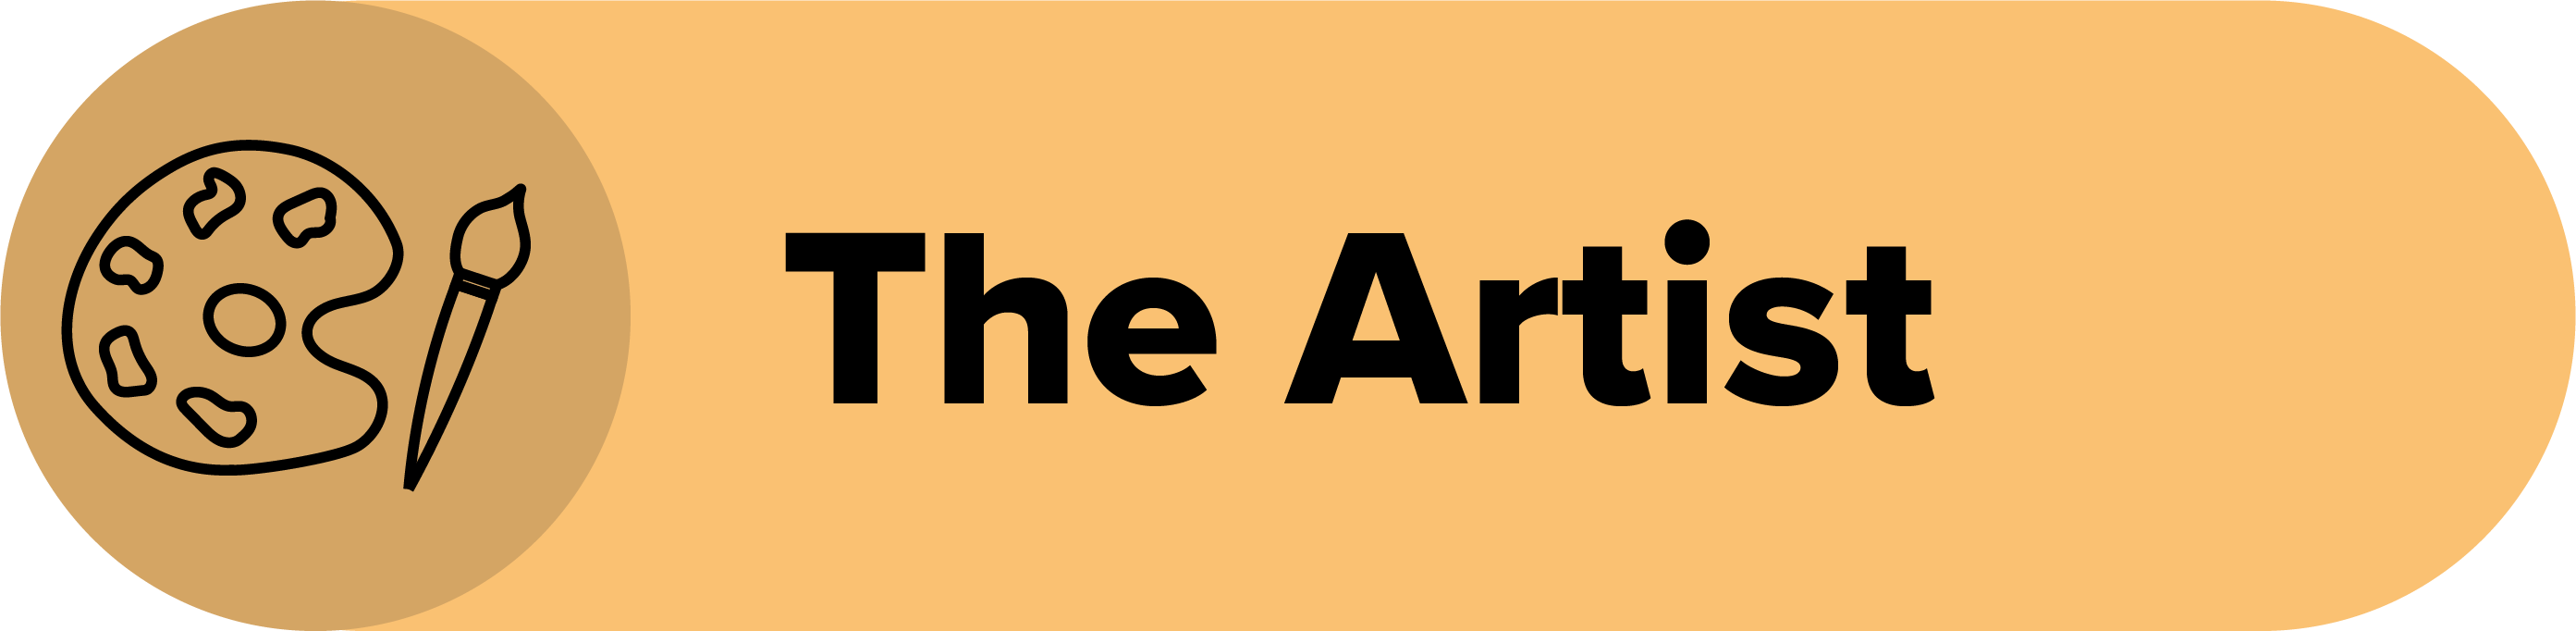 A yellow box contains a graphic of a paint brush and palette with text reading "The Artist"